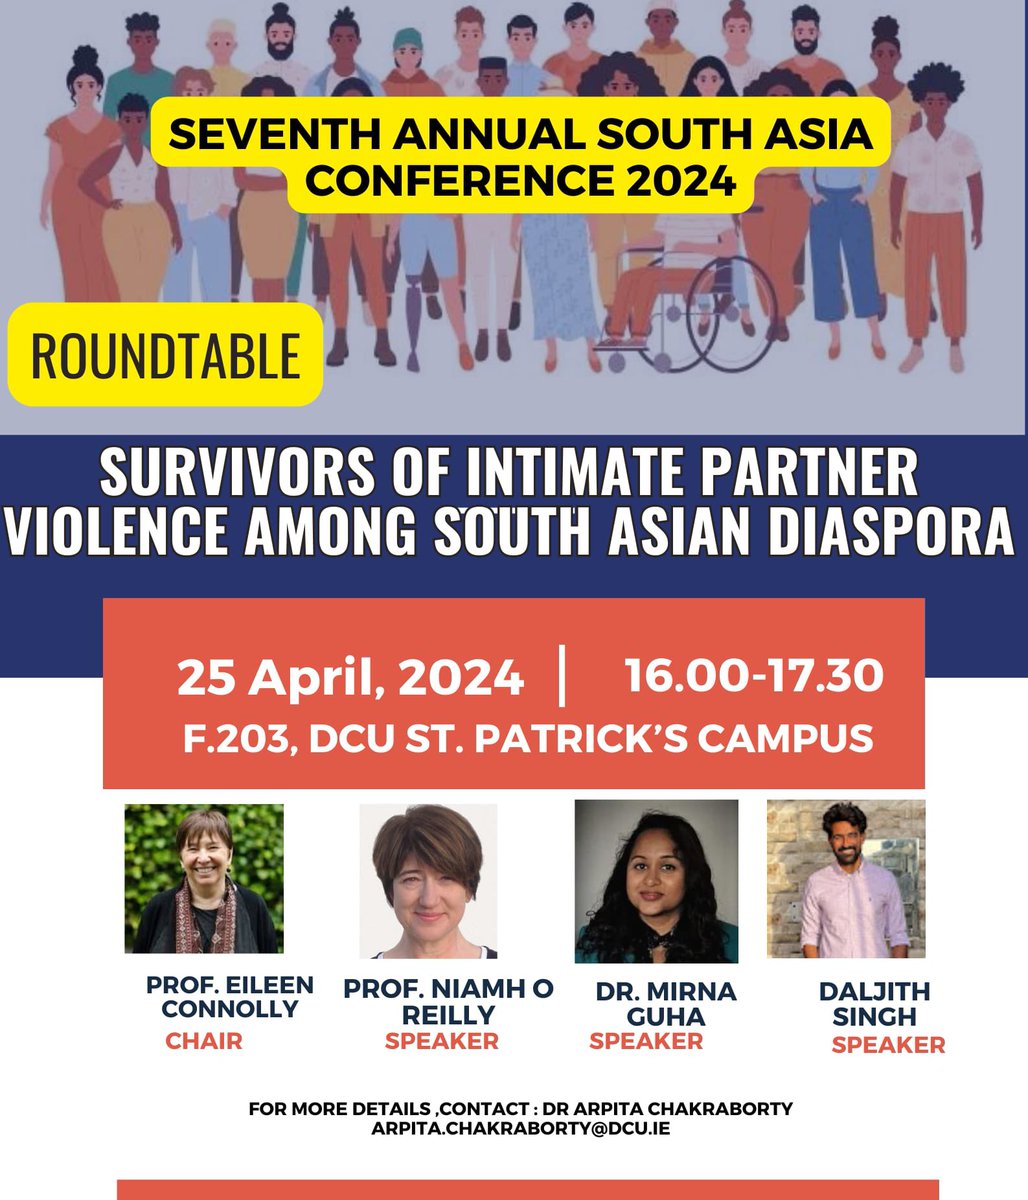 I am organising this Roundtable as part of our @DCU Annual #SouthAsia conference this Thursday at our St Patrick’s Campus. With Niamh Reilly, @ConnollyEileen @MirnaGuha, and Daljit Singh it is sure to be a rich conversation. Join us if you can, it will be lovely to see you!